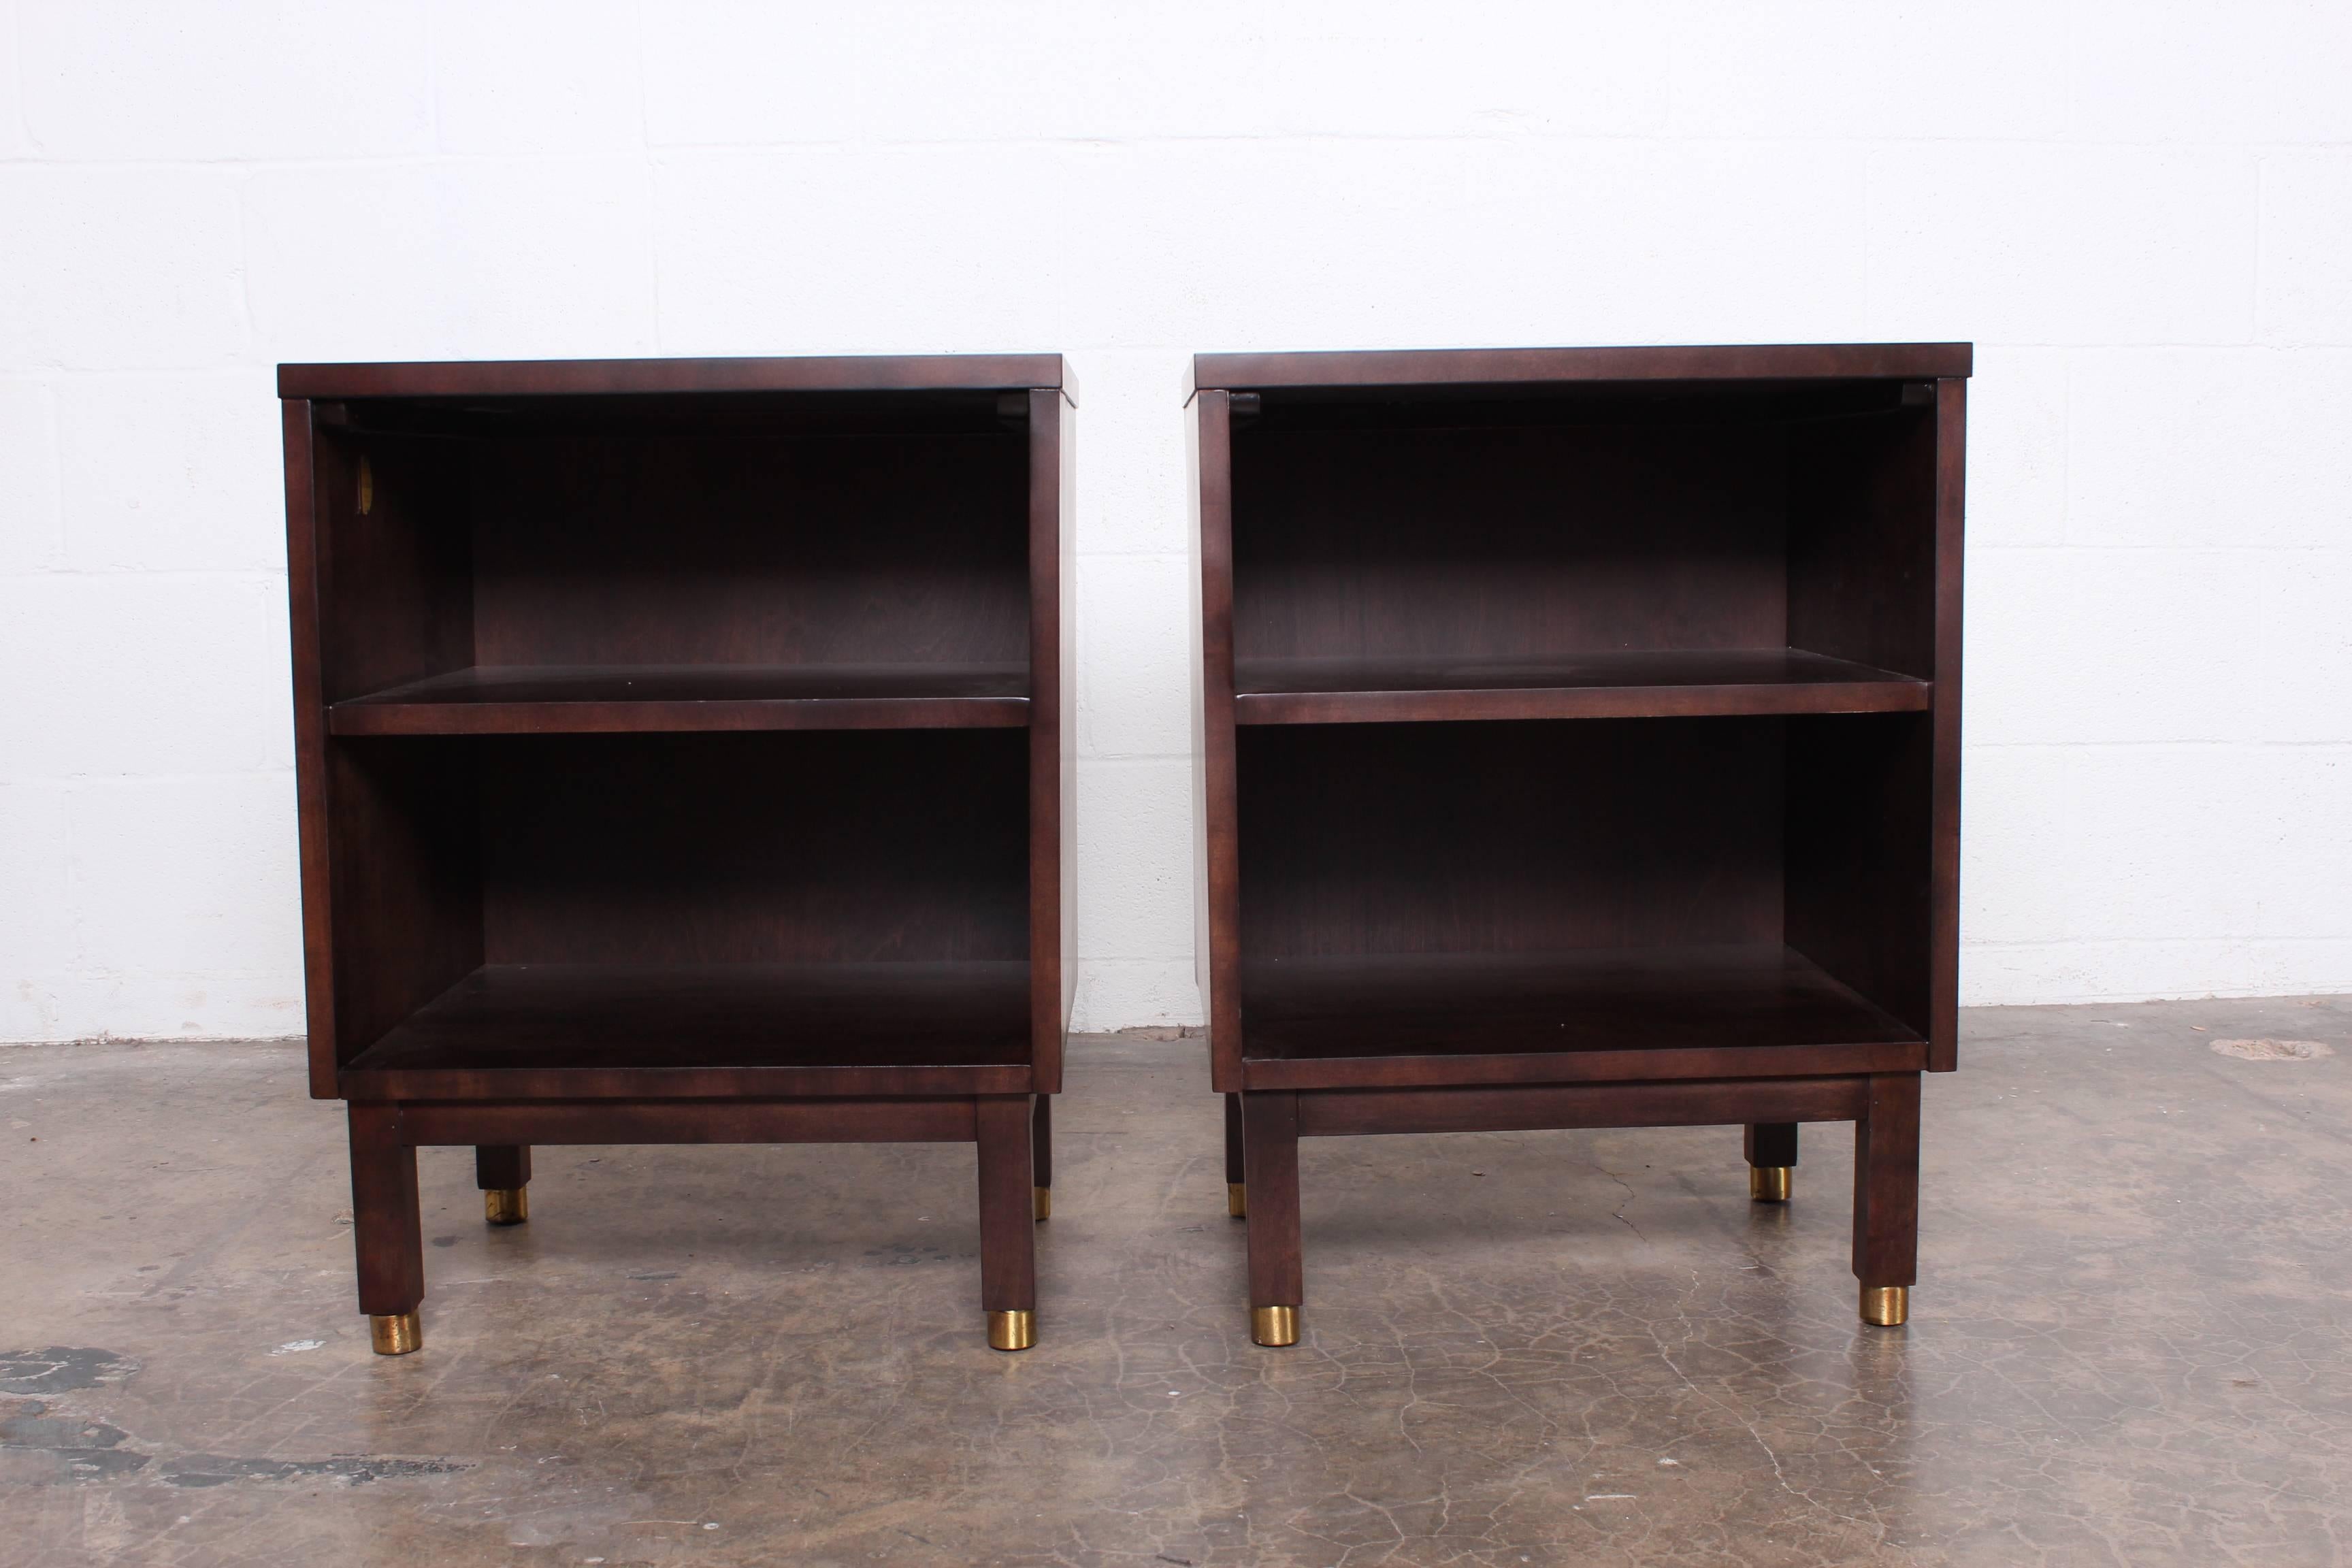 A pair of bedside tables in walnut with laminate tops and brass feet. Designed by Edward Wormley for Dunbar.